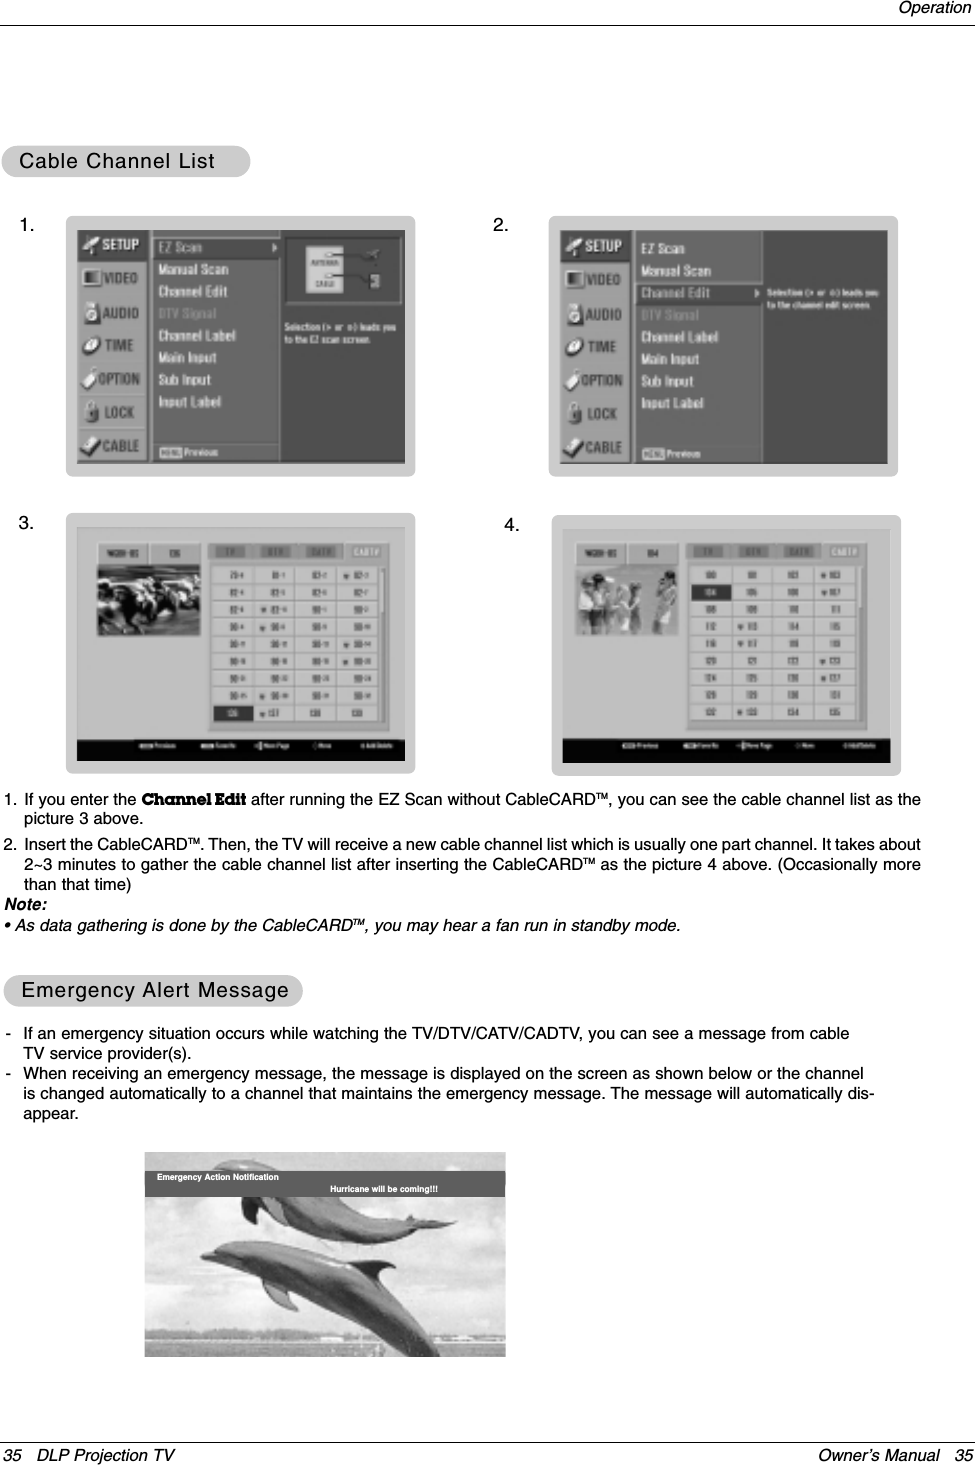 35 DLP Projection TV Owner’s Manual   35Operation- If an emergency situation occurs while watching the TV/DTV/CATV/CADTV, you can see a message from cableTV service provider(s).- When receiving an emergency message, the message is displayed on the screen as shown below or the channelis changed automatically to a channel that maintains the emergency message. The message will automatically dis-appear.Emergency Action Notification Hurricane will be coming!!!Cable Channel ListCable Channel ListEmergency Emergency Alert MessageAlert Message1. If you enter the Channel Edit after running the EZ Scan without CableCARDTM, you can see the cable channel list as thepicture 3 above.2. Insert the CableCARDTM. Then, the TV will receive a new cable channel list which is usually one part channel. It takes about2~3 minutes to gather the cable channel list after inserting the CableCARDTM as the picture 4 above. (Occasionally morethan that time)Note:• As data gathering is done by the CableCARDTM, you may hear a fan run in standby mode.1. 2.3. 4.